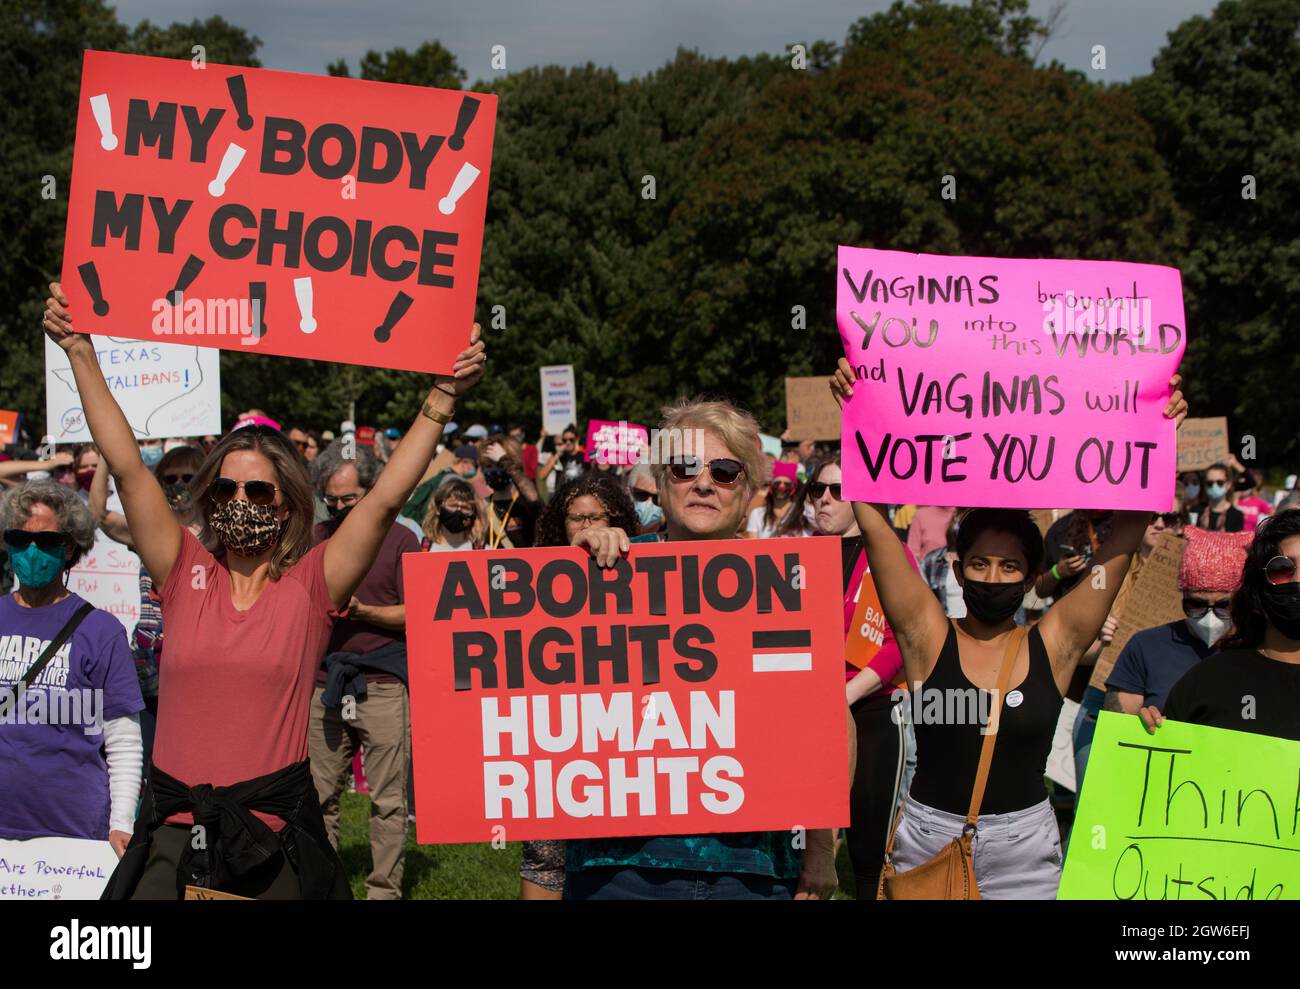 Women’s March, Franklin Park, Boston, Massachusetts 02 Oct.2021.  More than 1,000 gathered in support of abortion rights as over 600 similar demonstrations were held across the United States in reaction to a Texas state law severely restricting abortions. Credit: Chuck Nacke / Alamy Live News Stock Photo